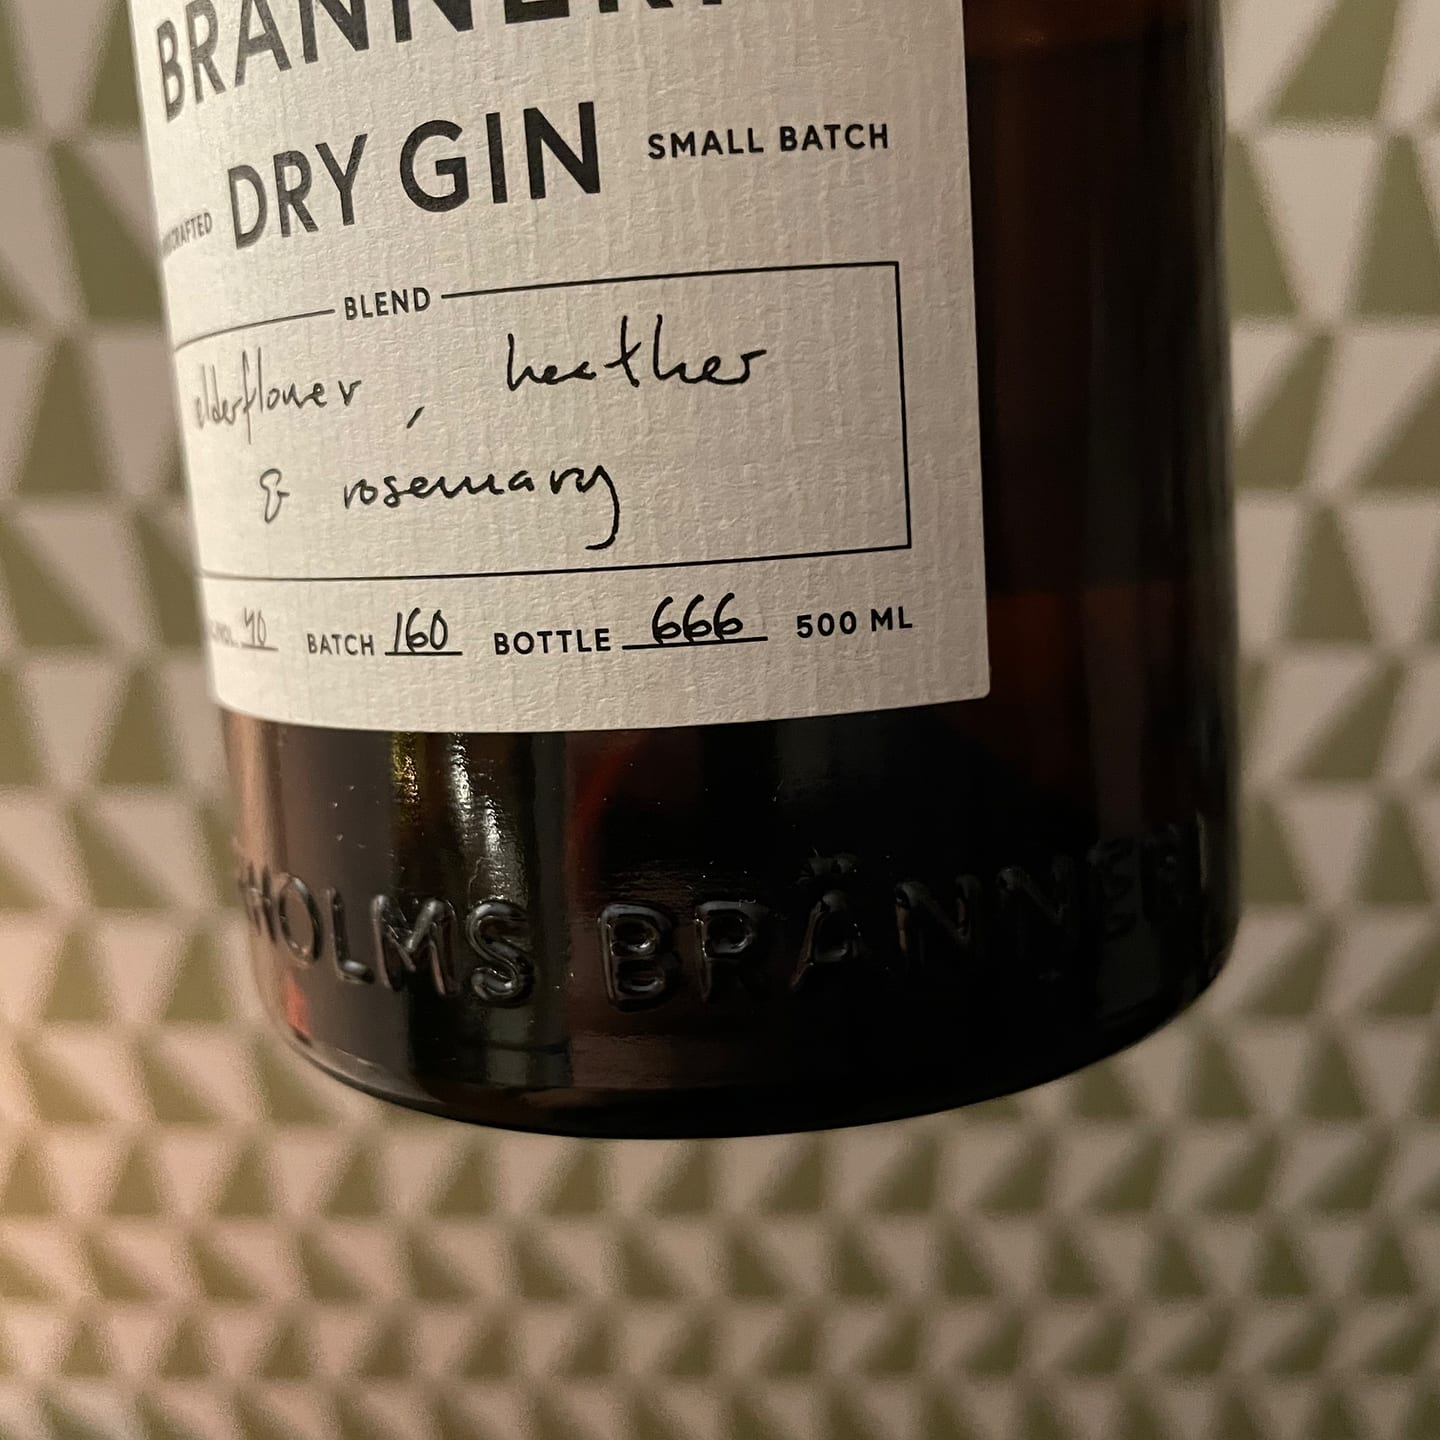 Closeup of a sturdy bottle. The label says dry gin, small batch. Bottle 666.